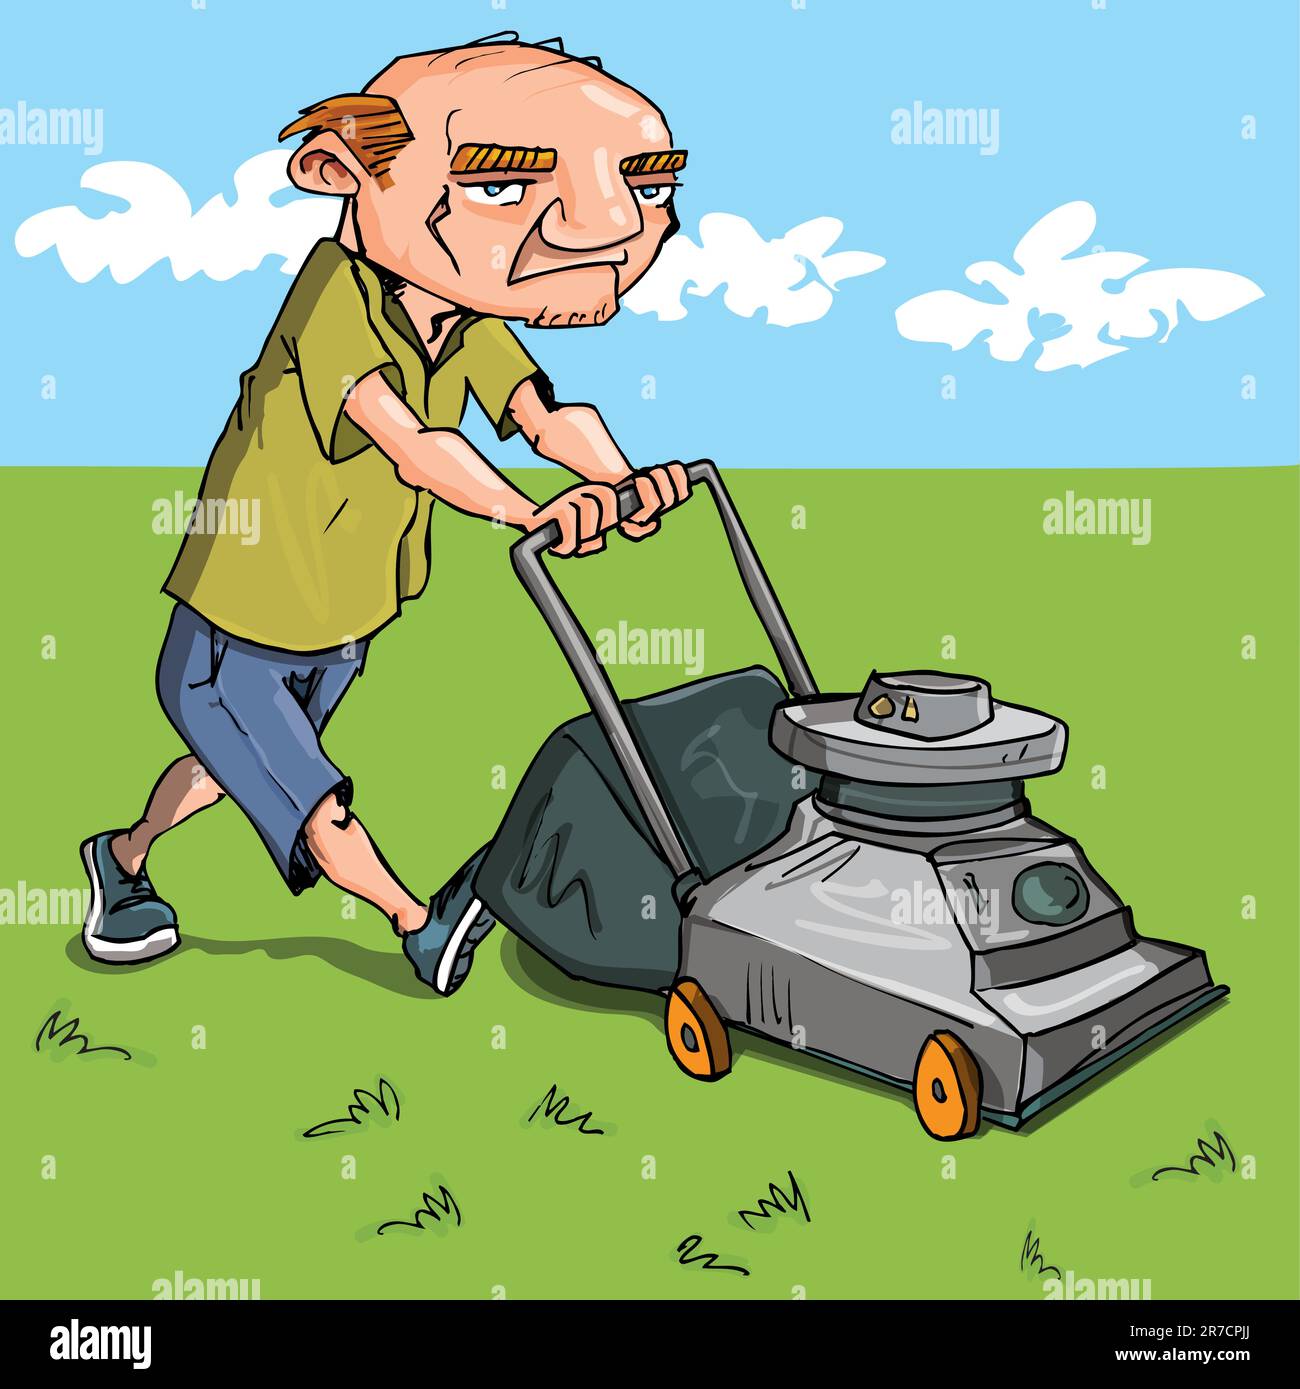 Cartoon man mowing his lawn. Grass and blue sky behind Stock Vector